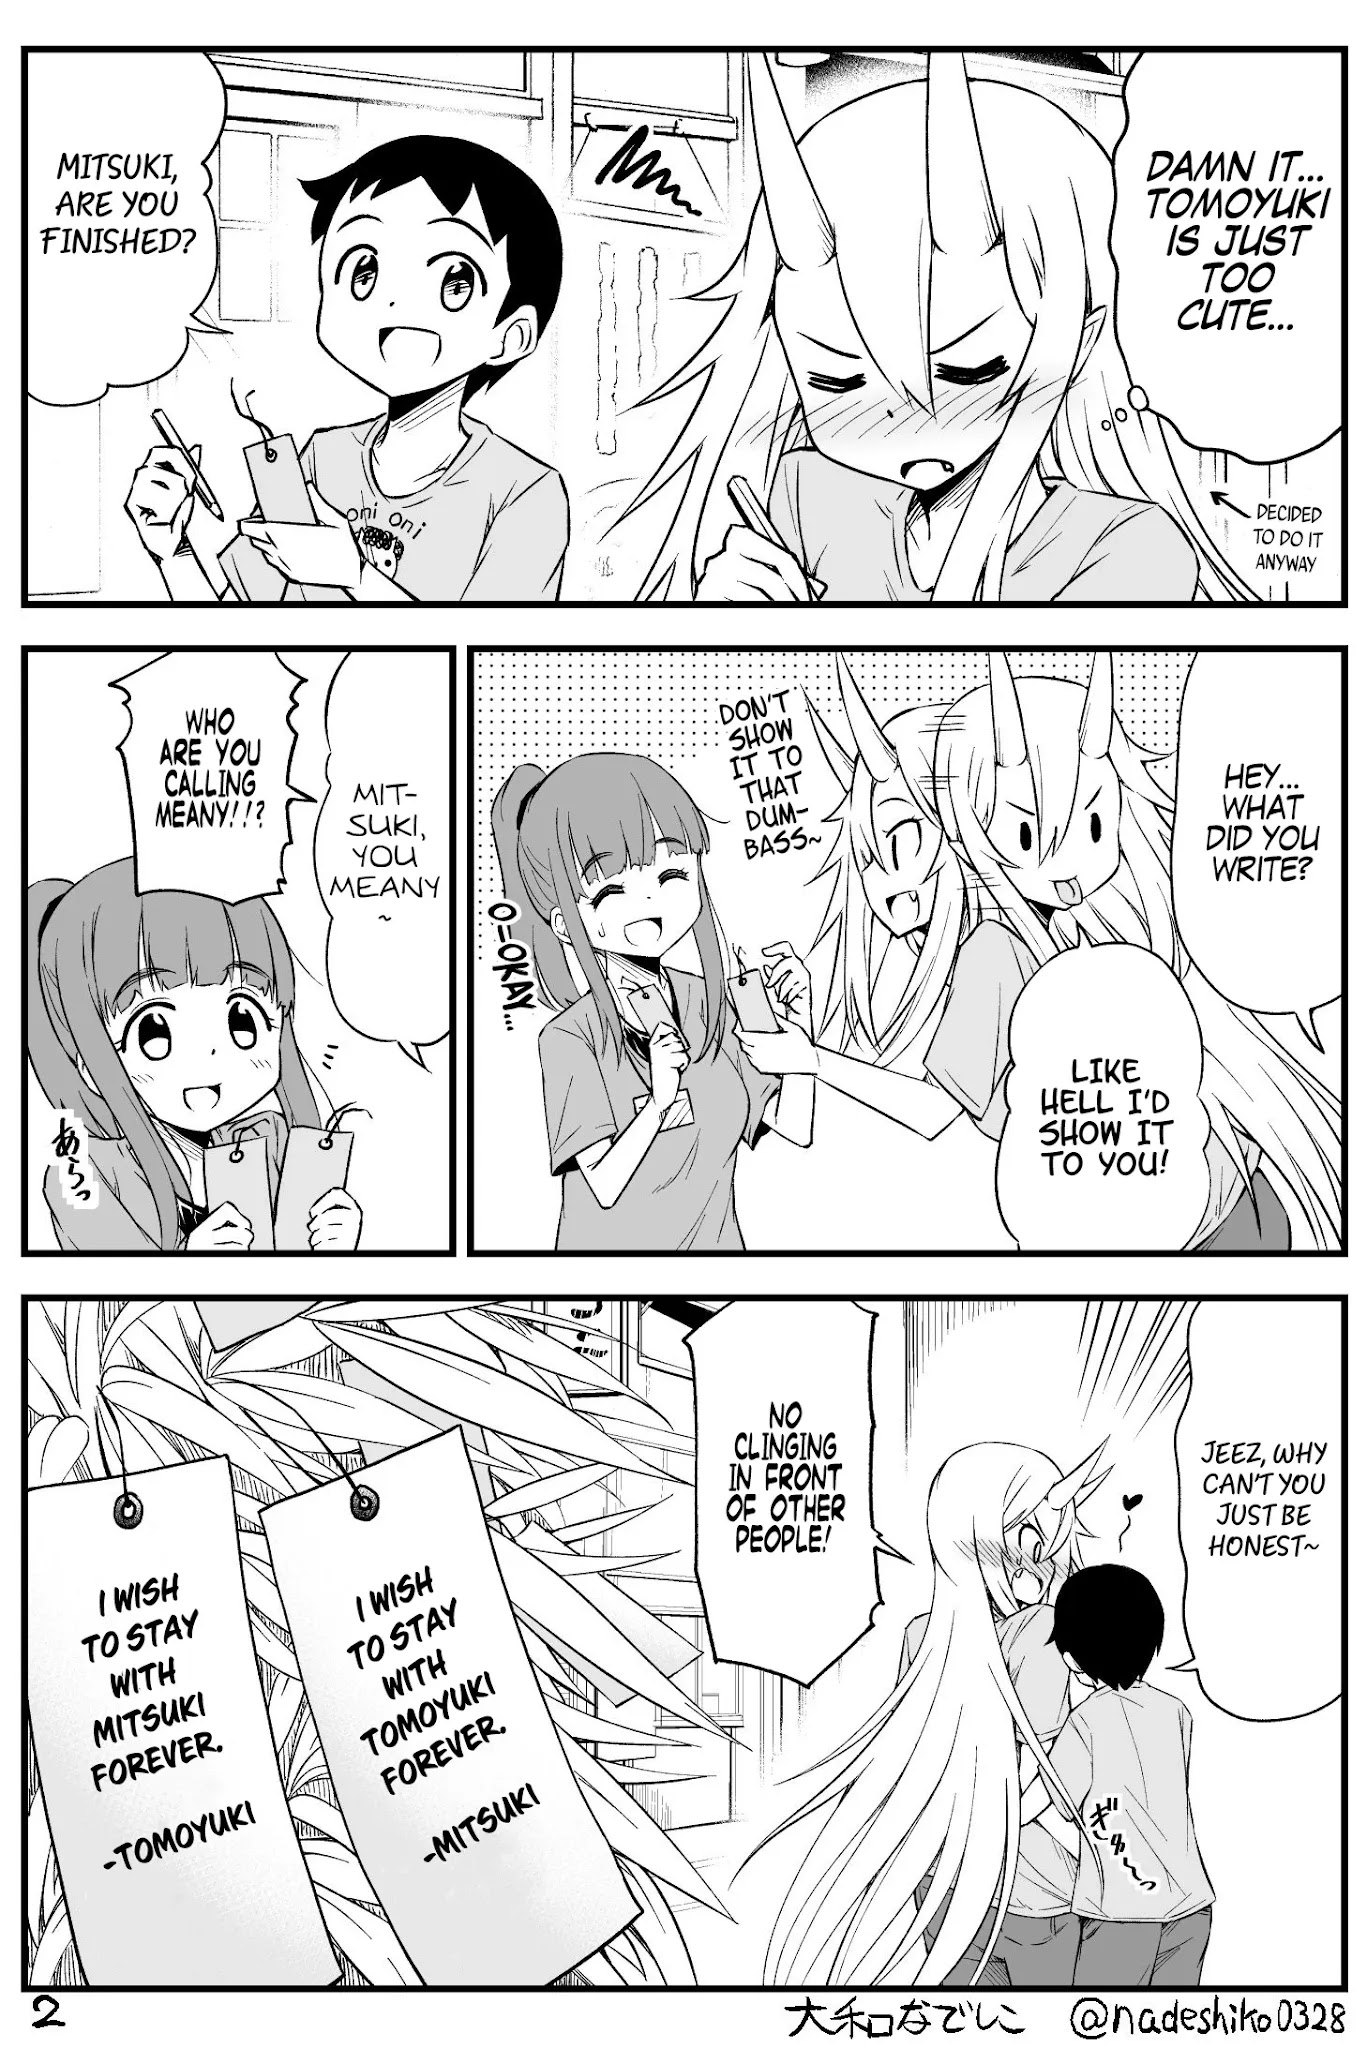 What I Get For Marrying A Demon Bride - Page 2